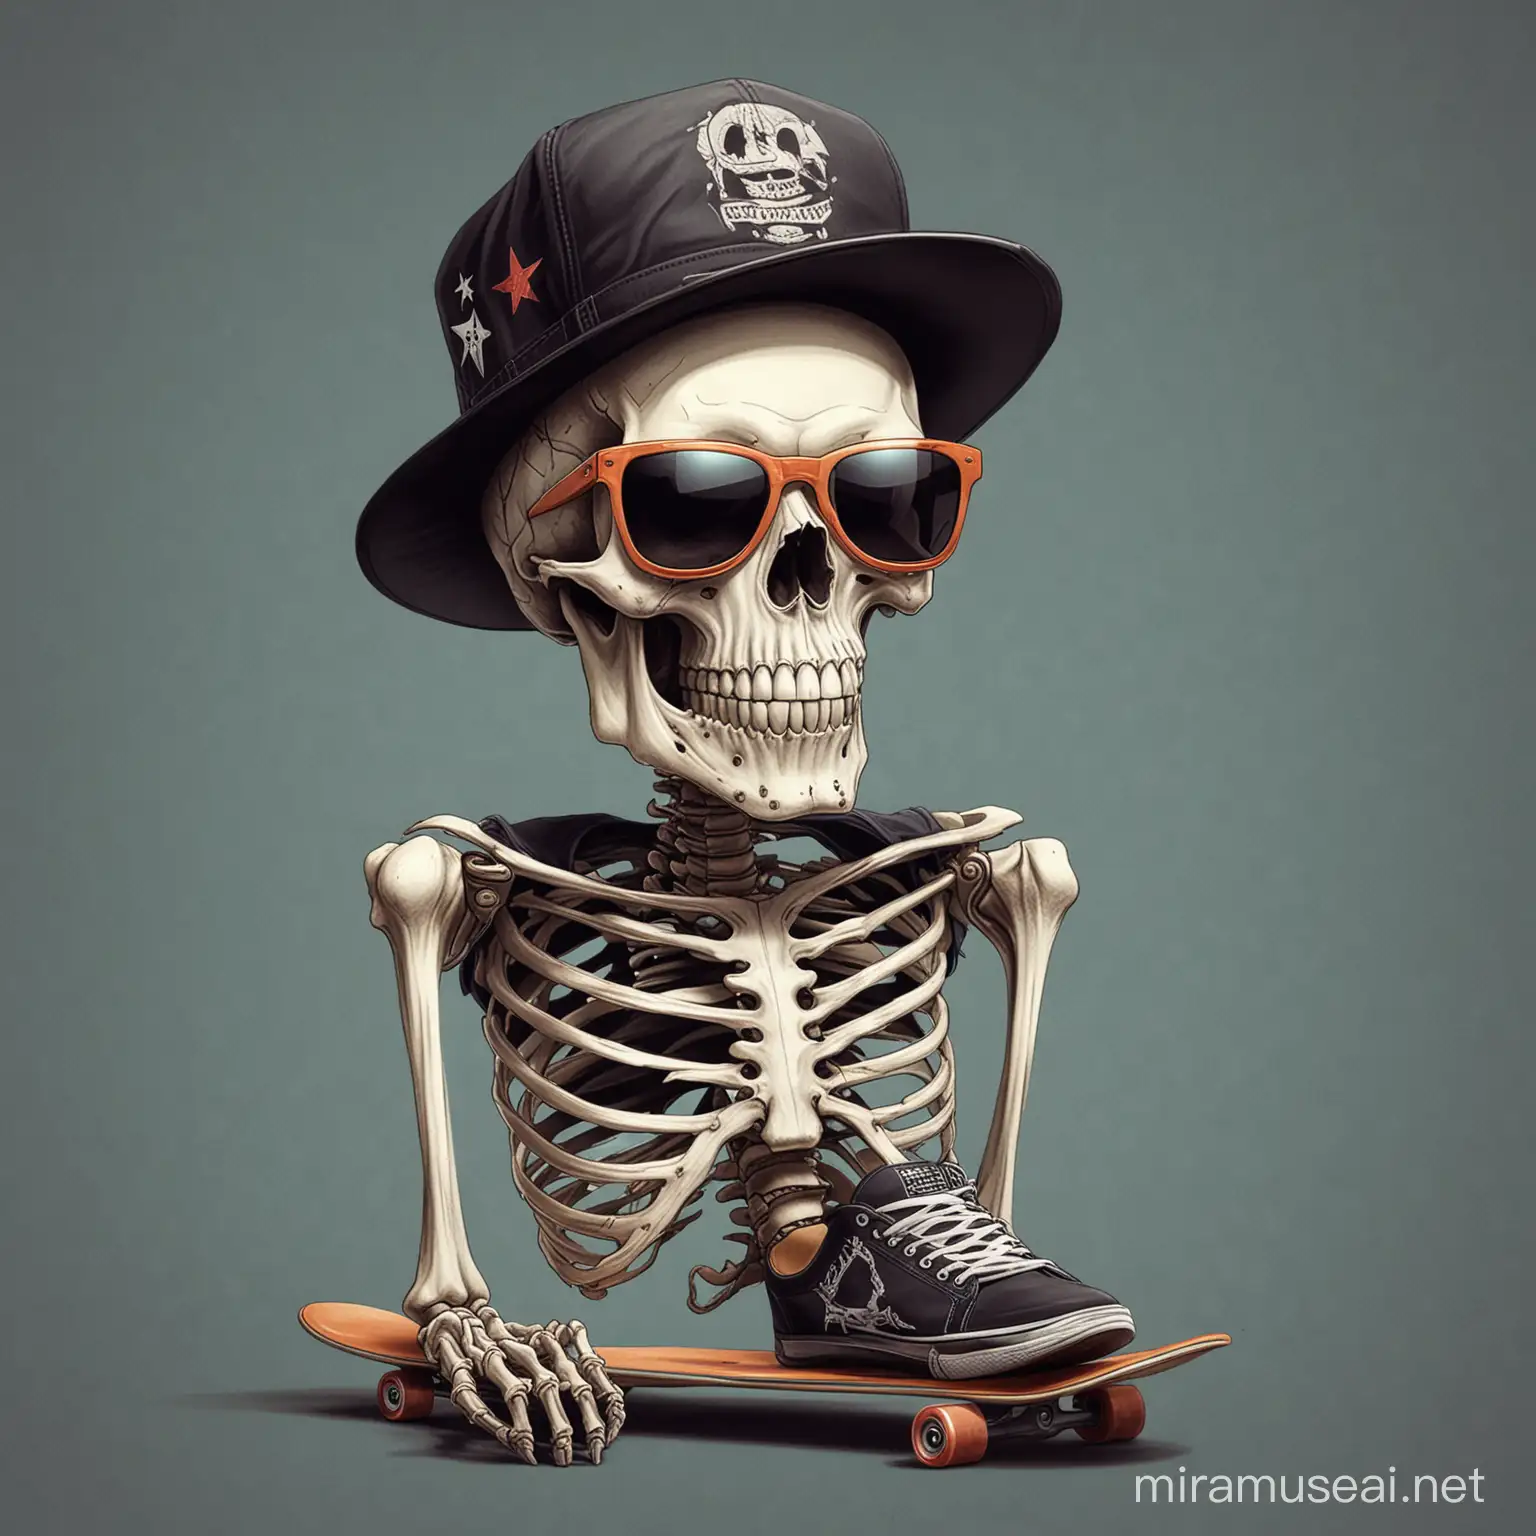 american traditional style graphic of a skeleton with sunglasses, a tank top and a backwards hat skateboarding